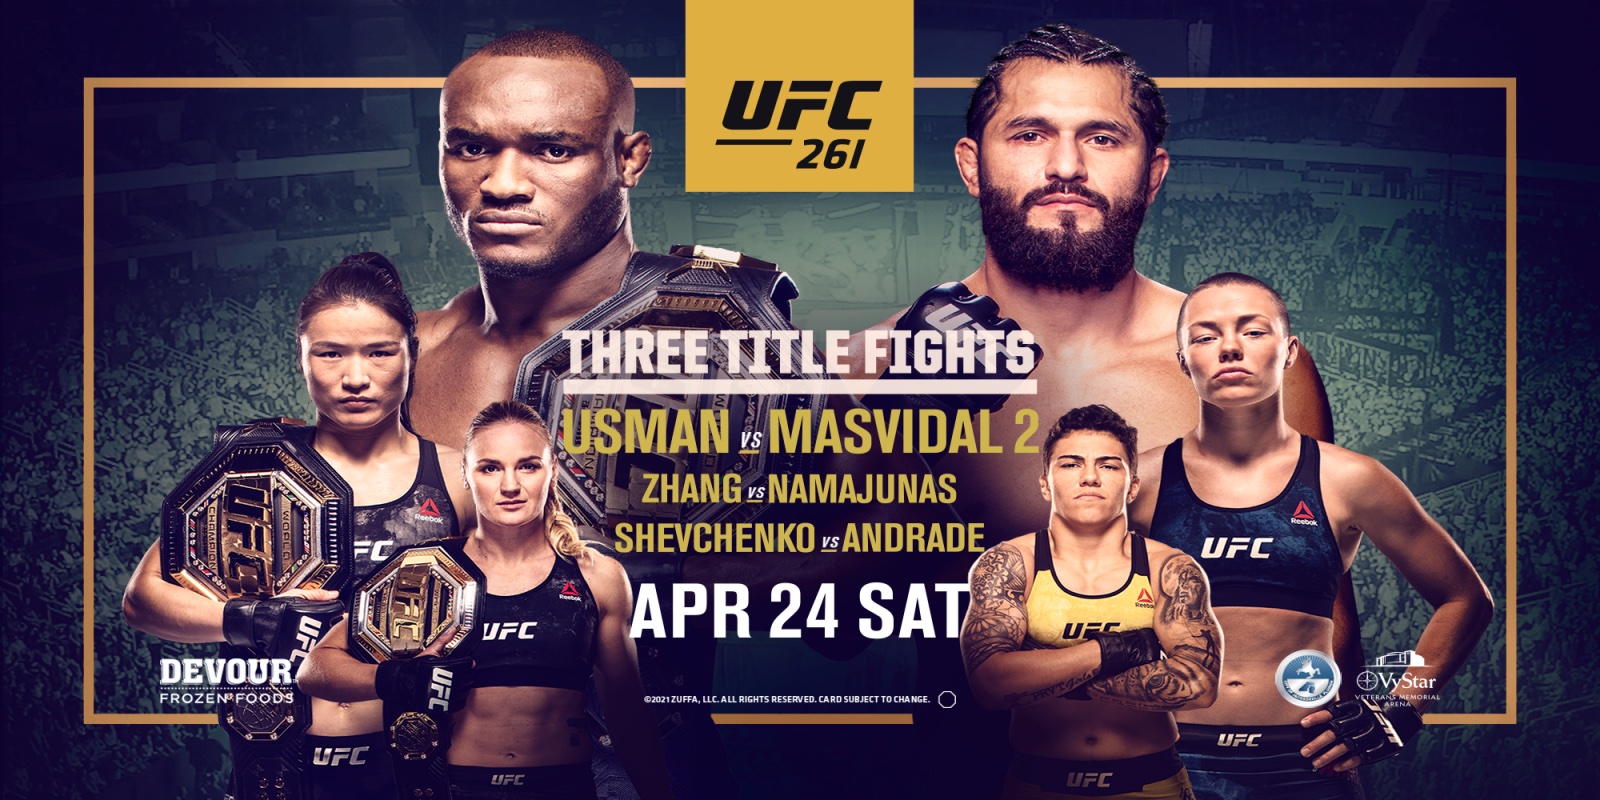 Watch Ufc 261 For Free Factory Sale, SAVE 31%